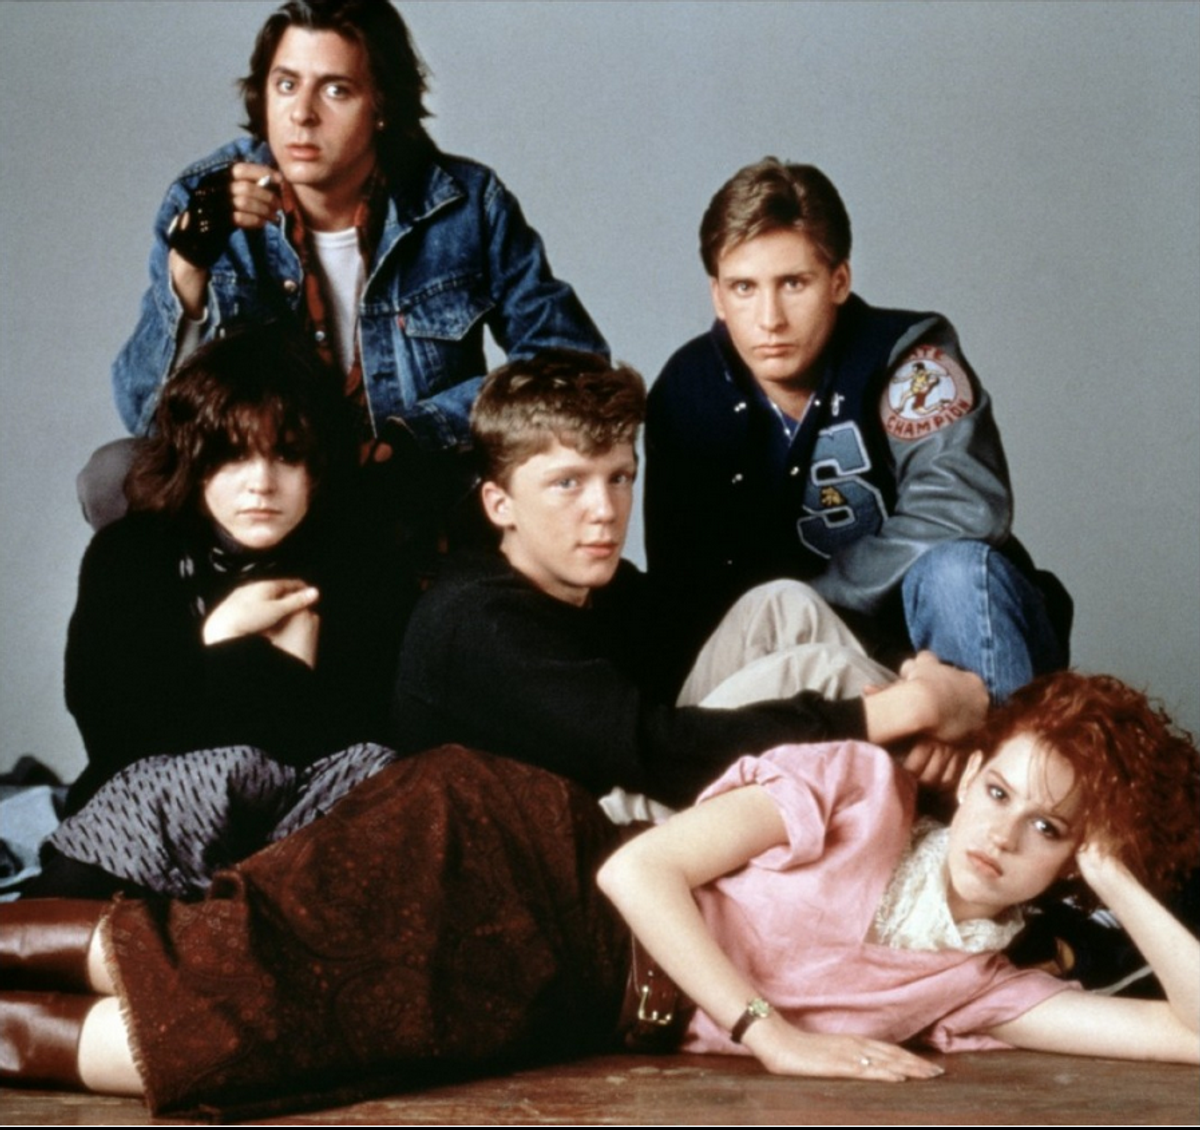 Important Lessons The Breakfast Club Taught Us